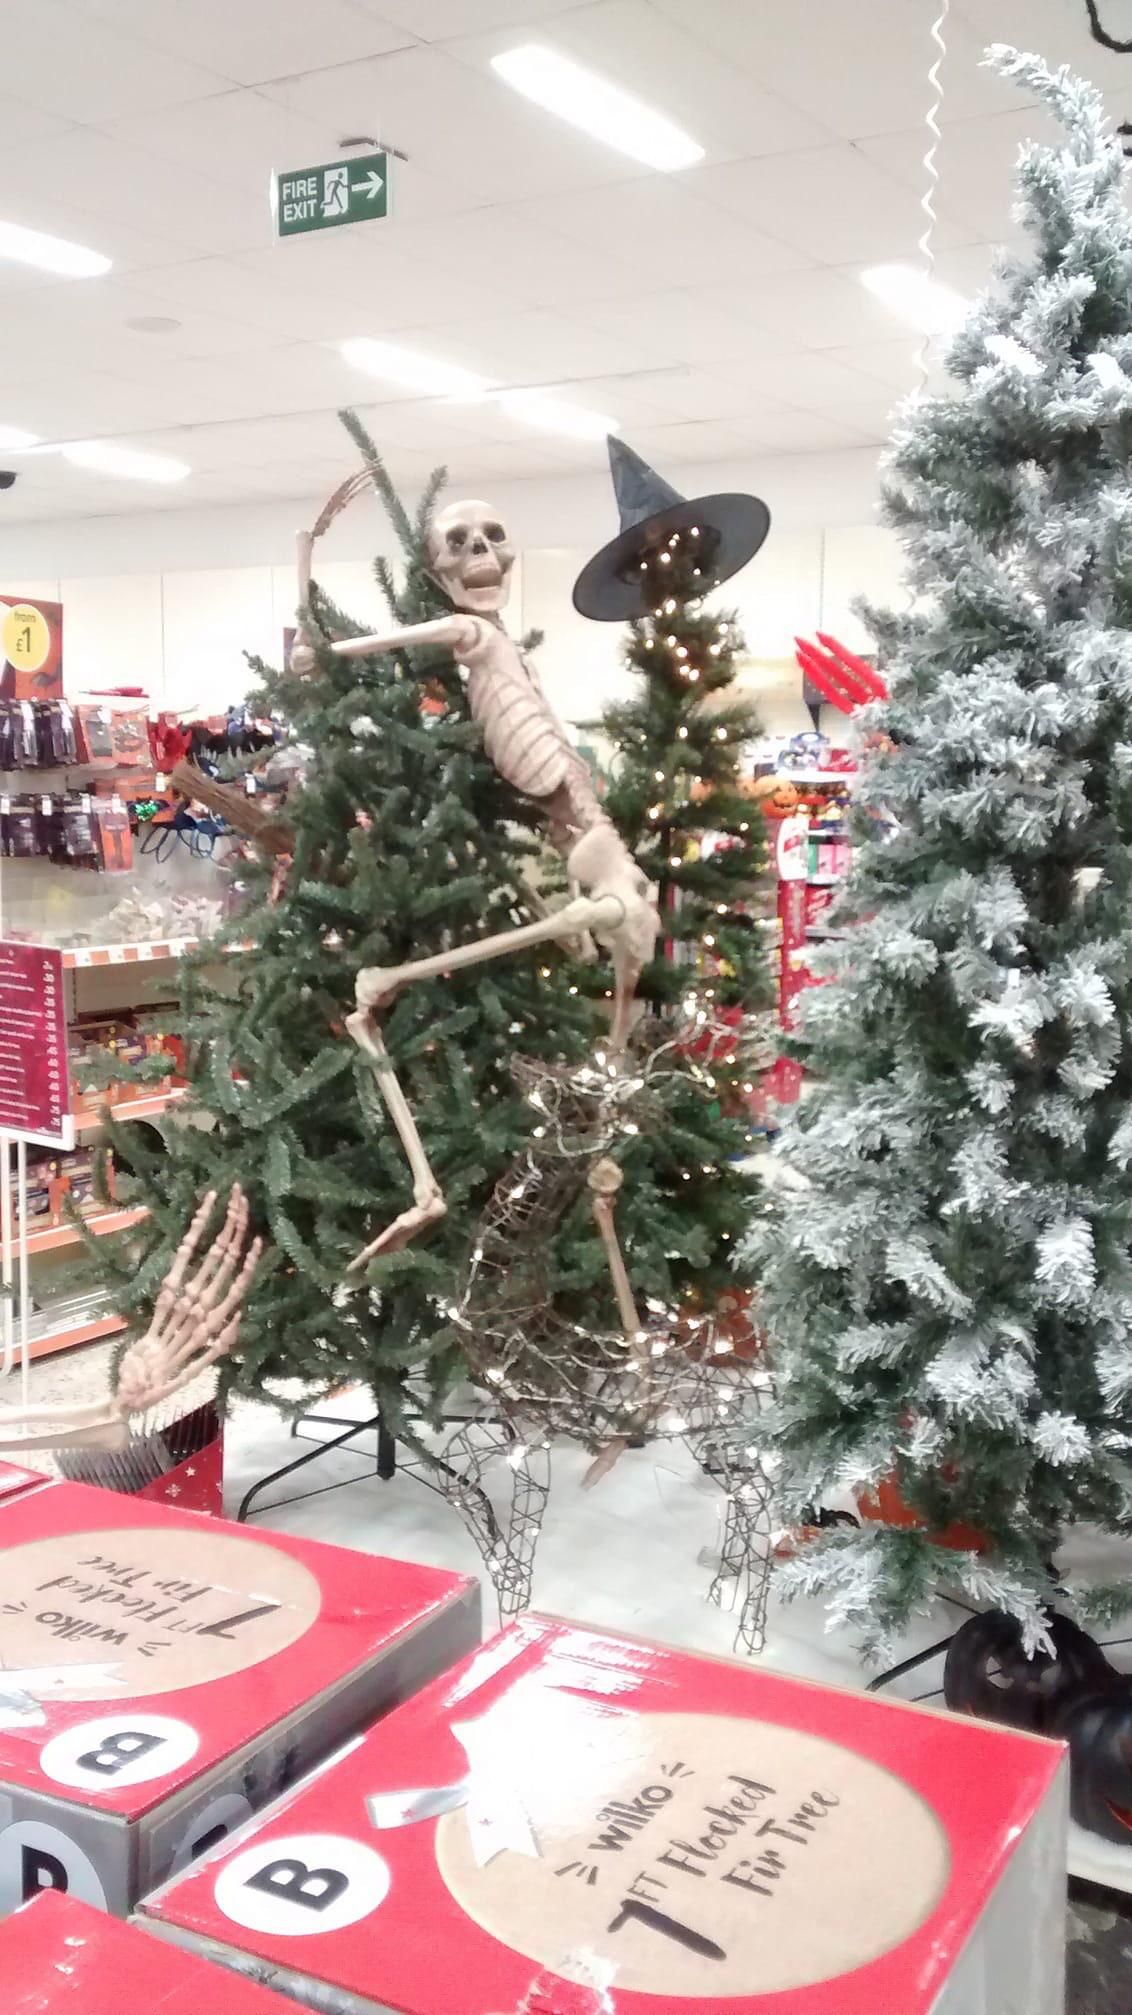 When the Christmas decorations hit the stores before Halloween.